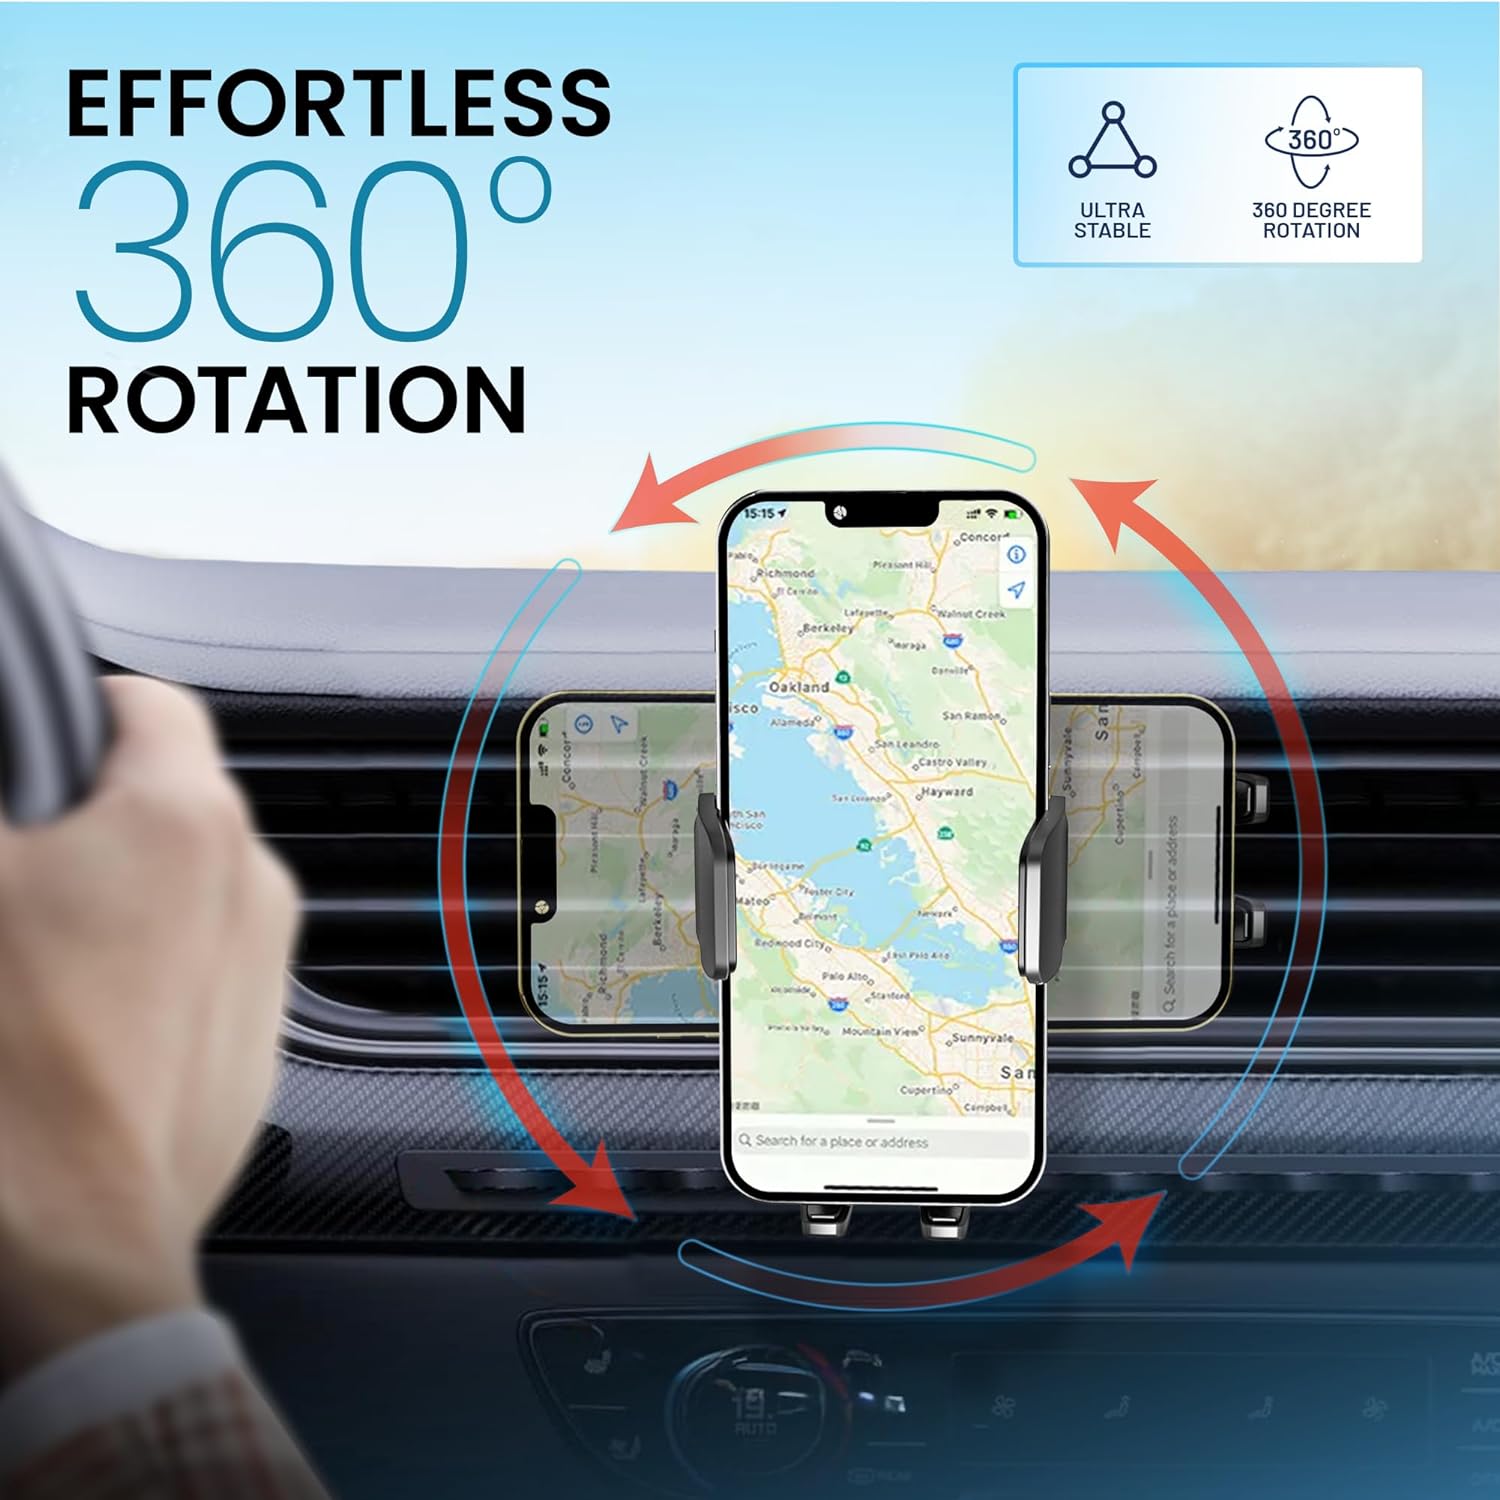 PORTENTUM Car Phone Holder, Air Vent Car Phone Mount Cradle 360° Rotation - Upgraded Hook Clip and One Button Release Function - Super Stable Car Phone Holder - Amazing Gadgets Outlet